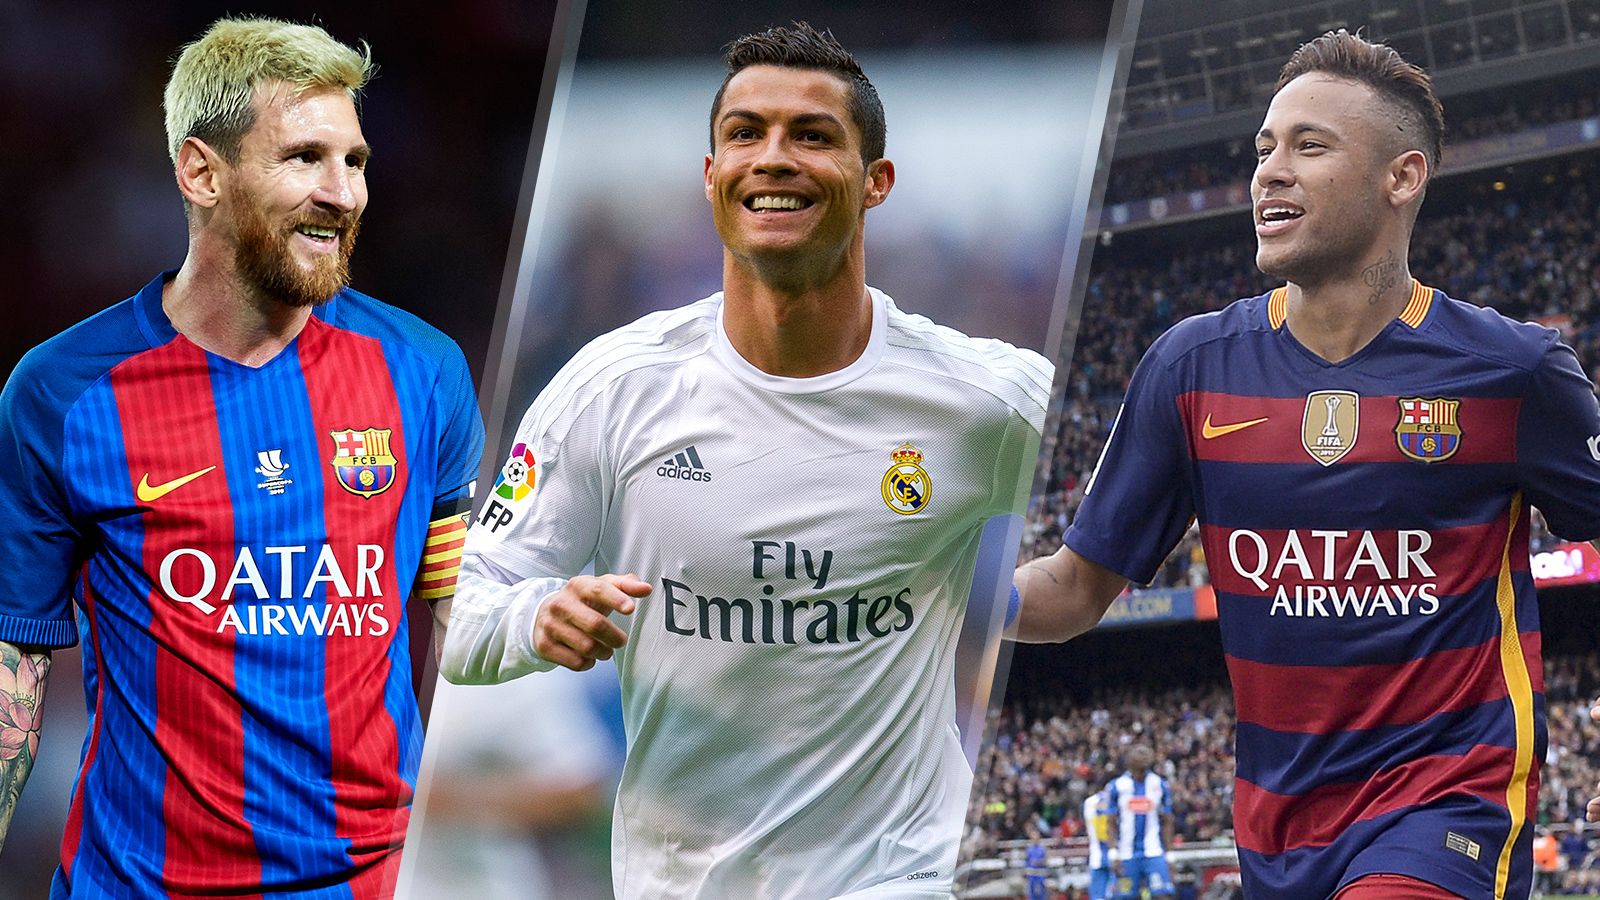 How the finalists for the 2016 Ballon d'Or ranked